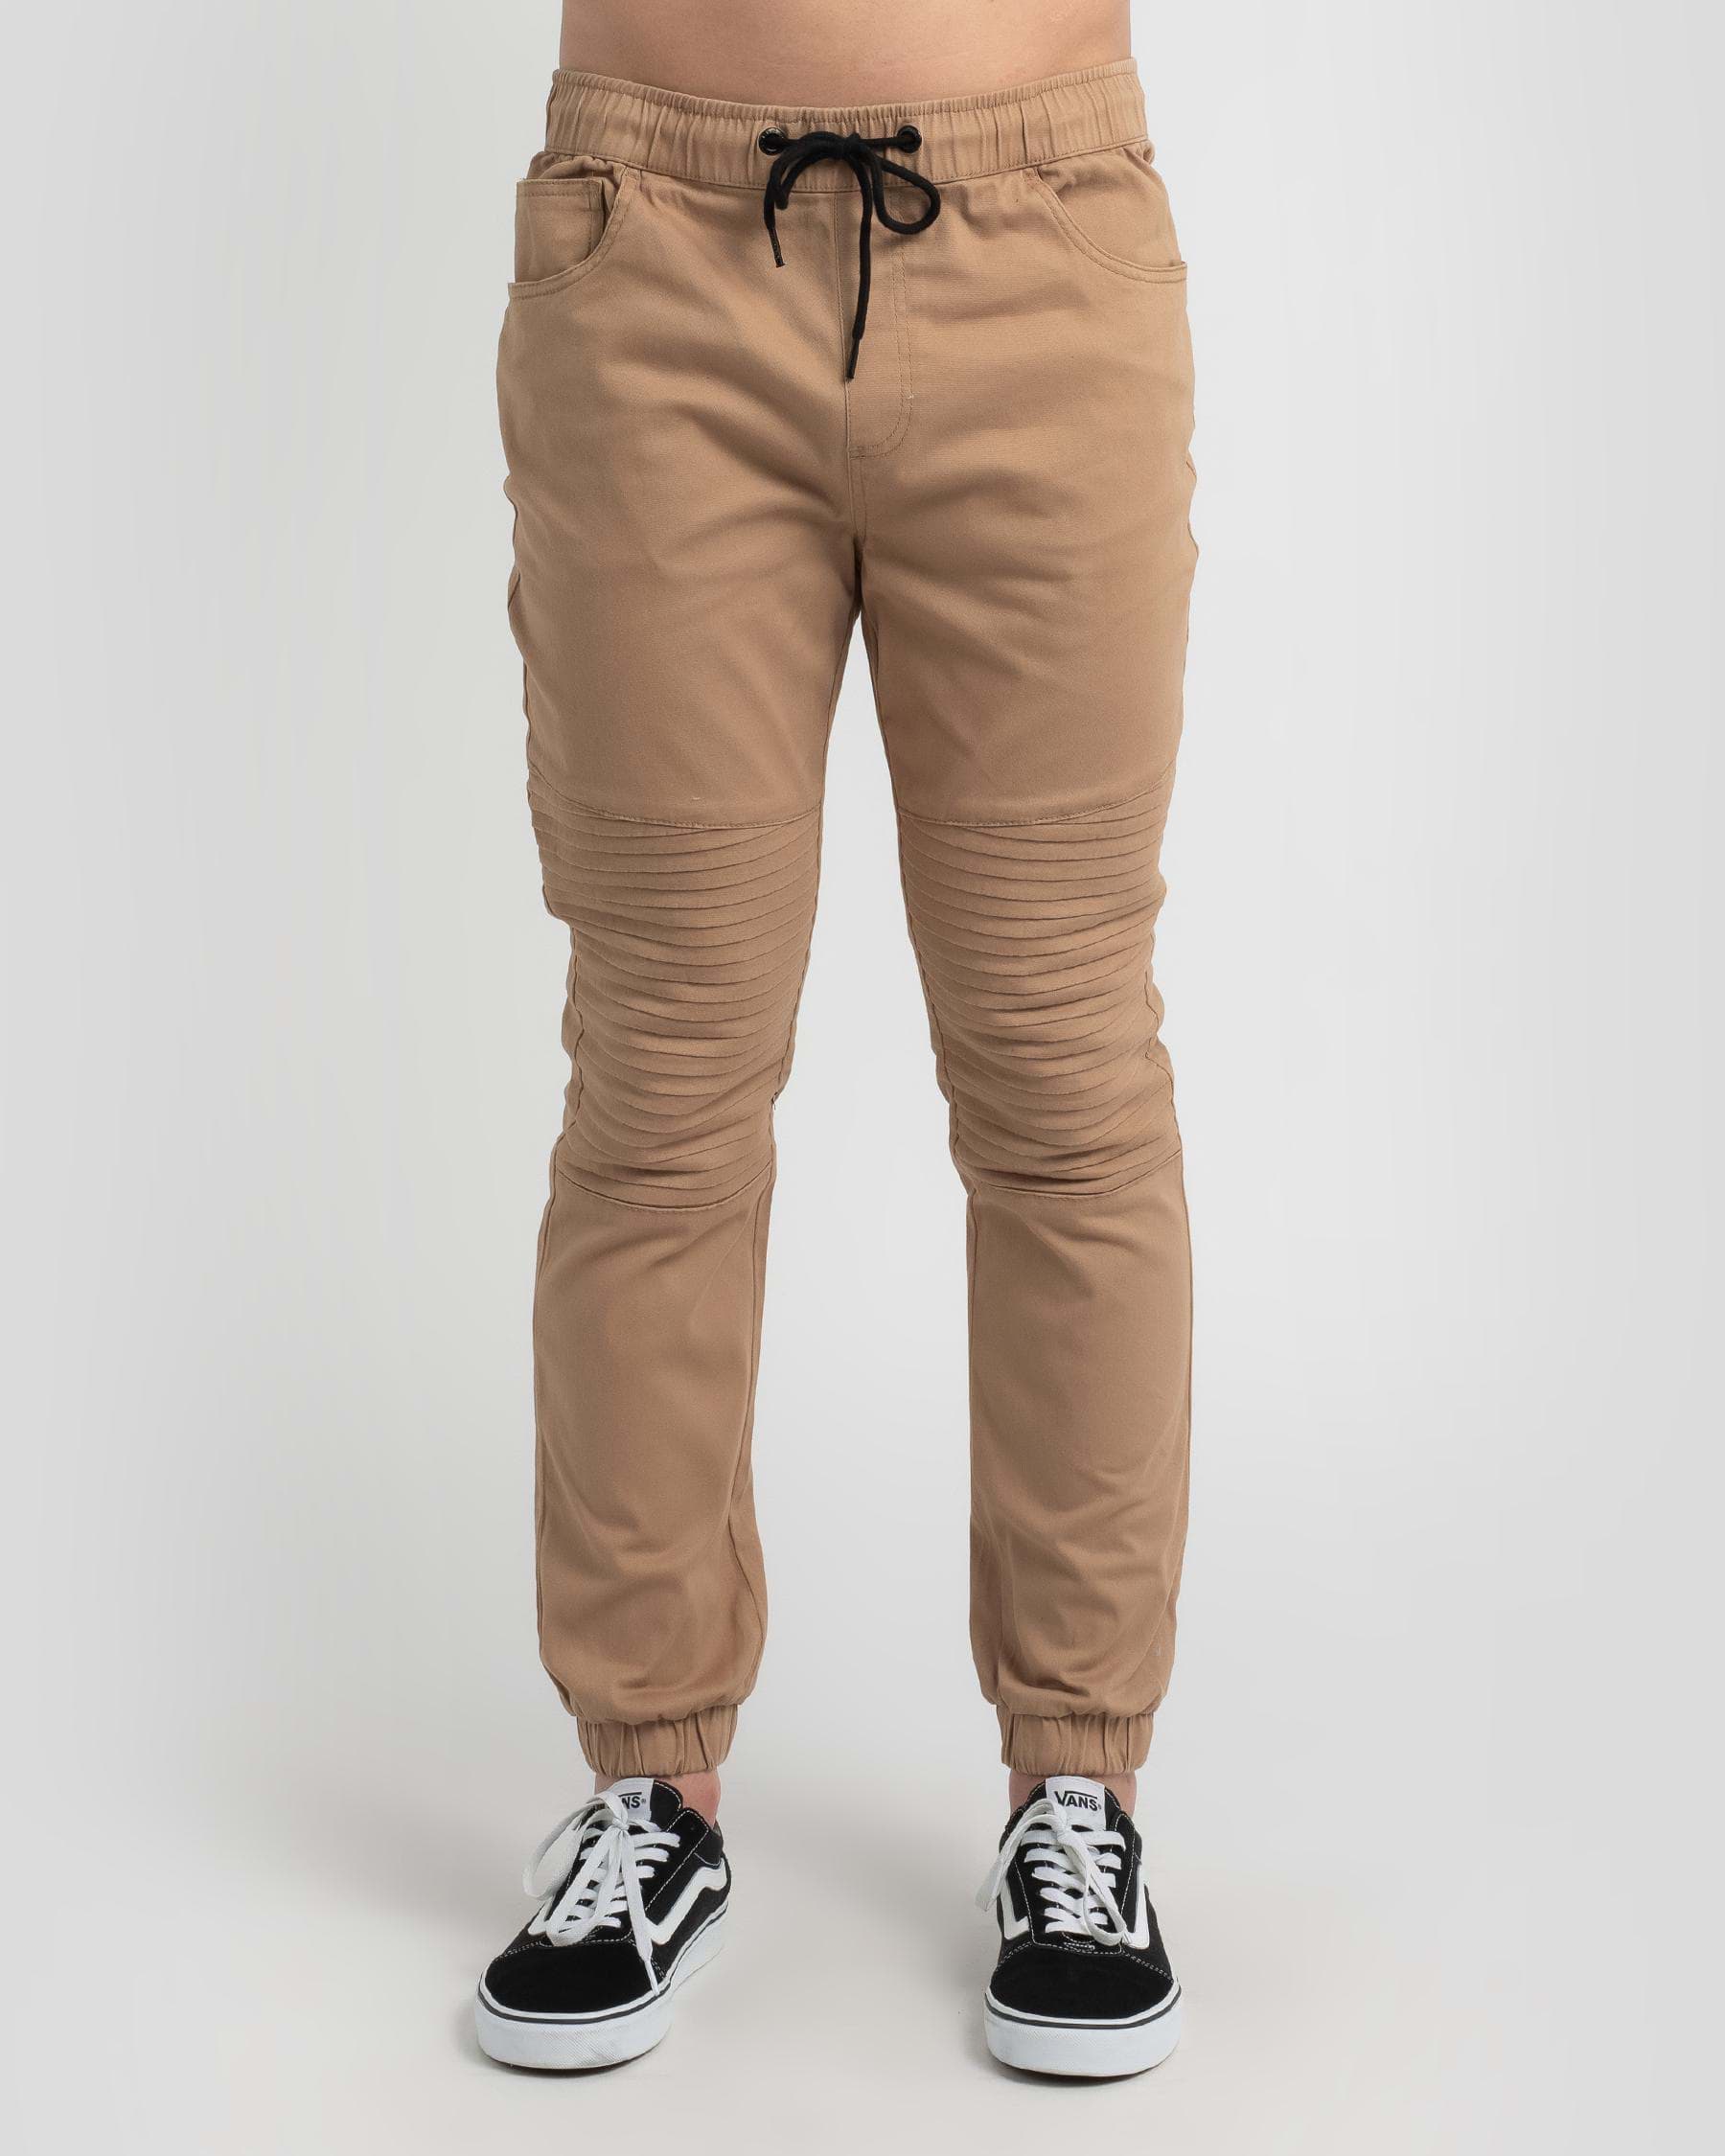 Lucid Construct Jogger Pants In Tan - Fast Shipping & Easy Returns ...